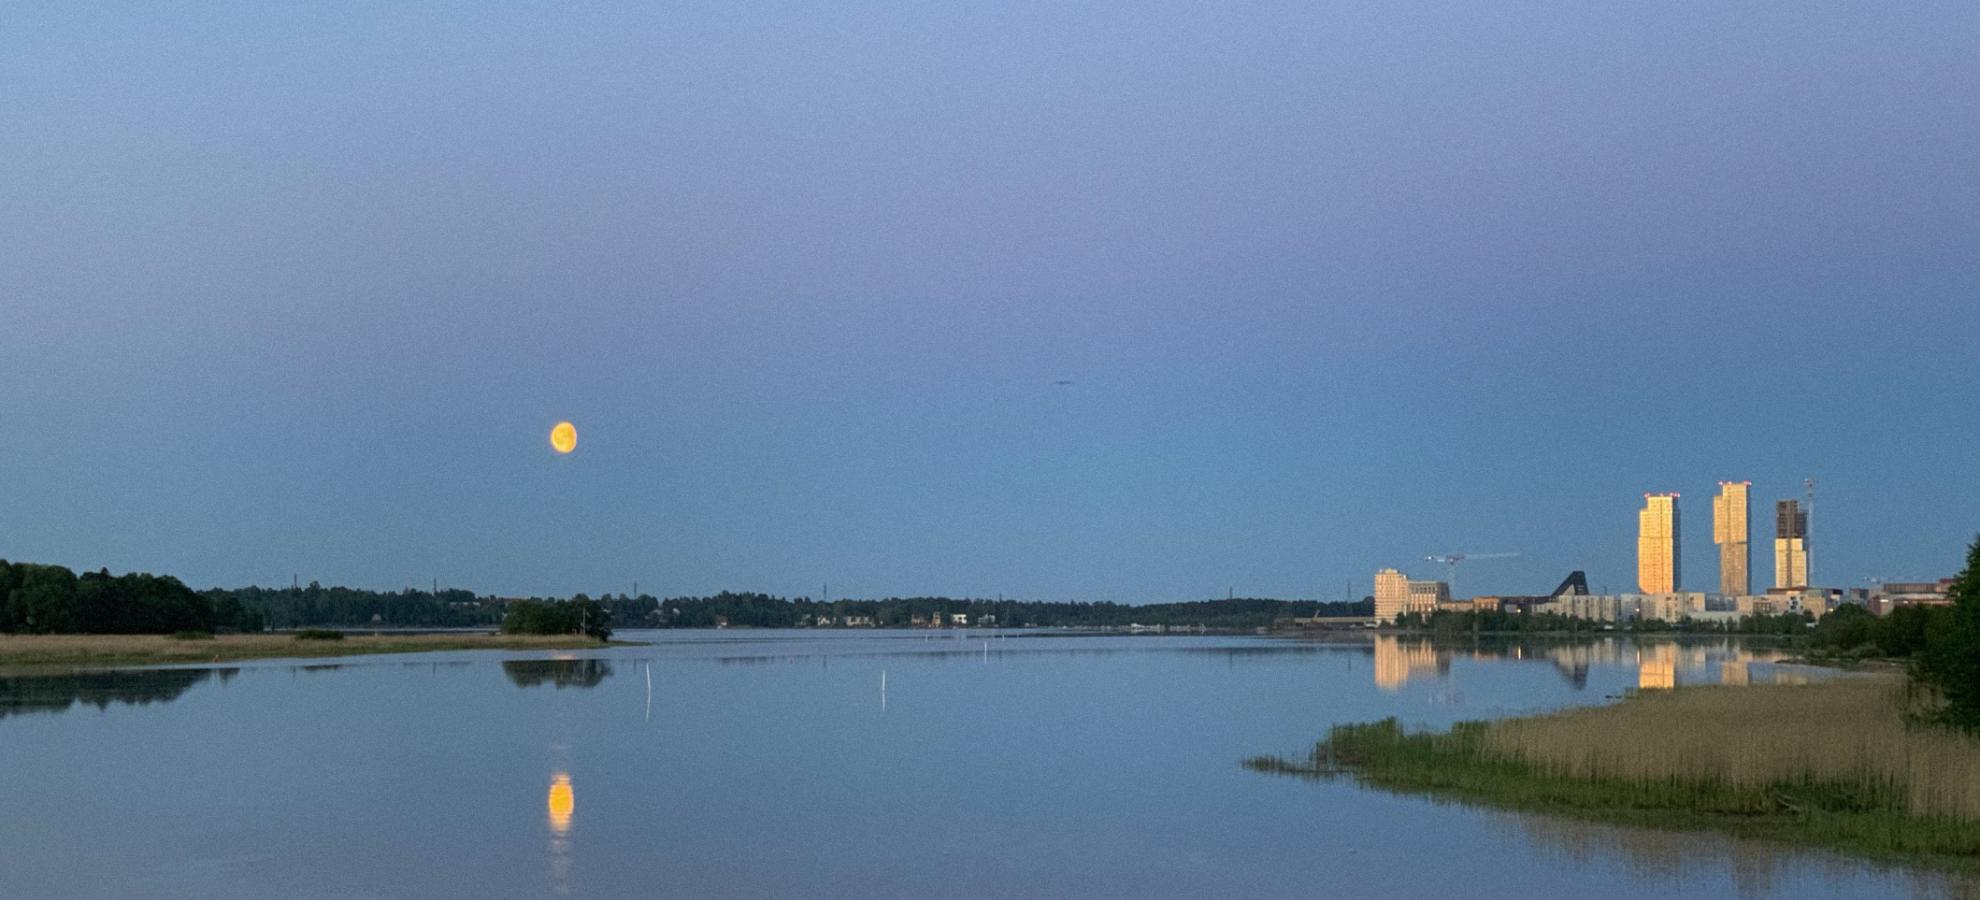 With a yellow moon against a deep blue sky at dusk, the bay next to Lammassaari stretches to shoreline on the horizon, where the tall buildings of Kalasatama standing on the right are lit by the setting sun.